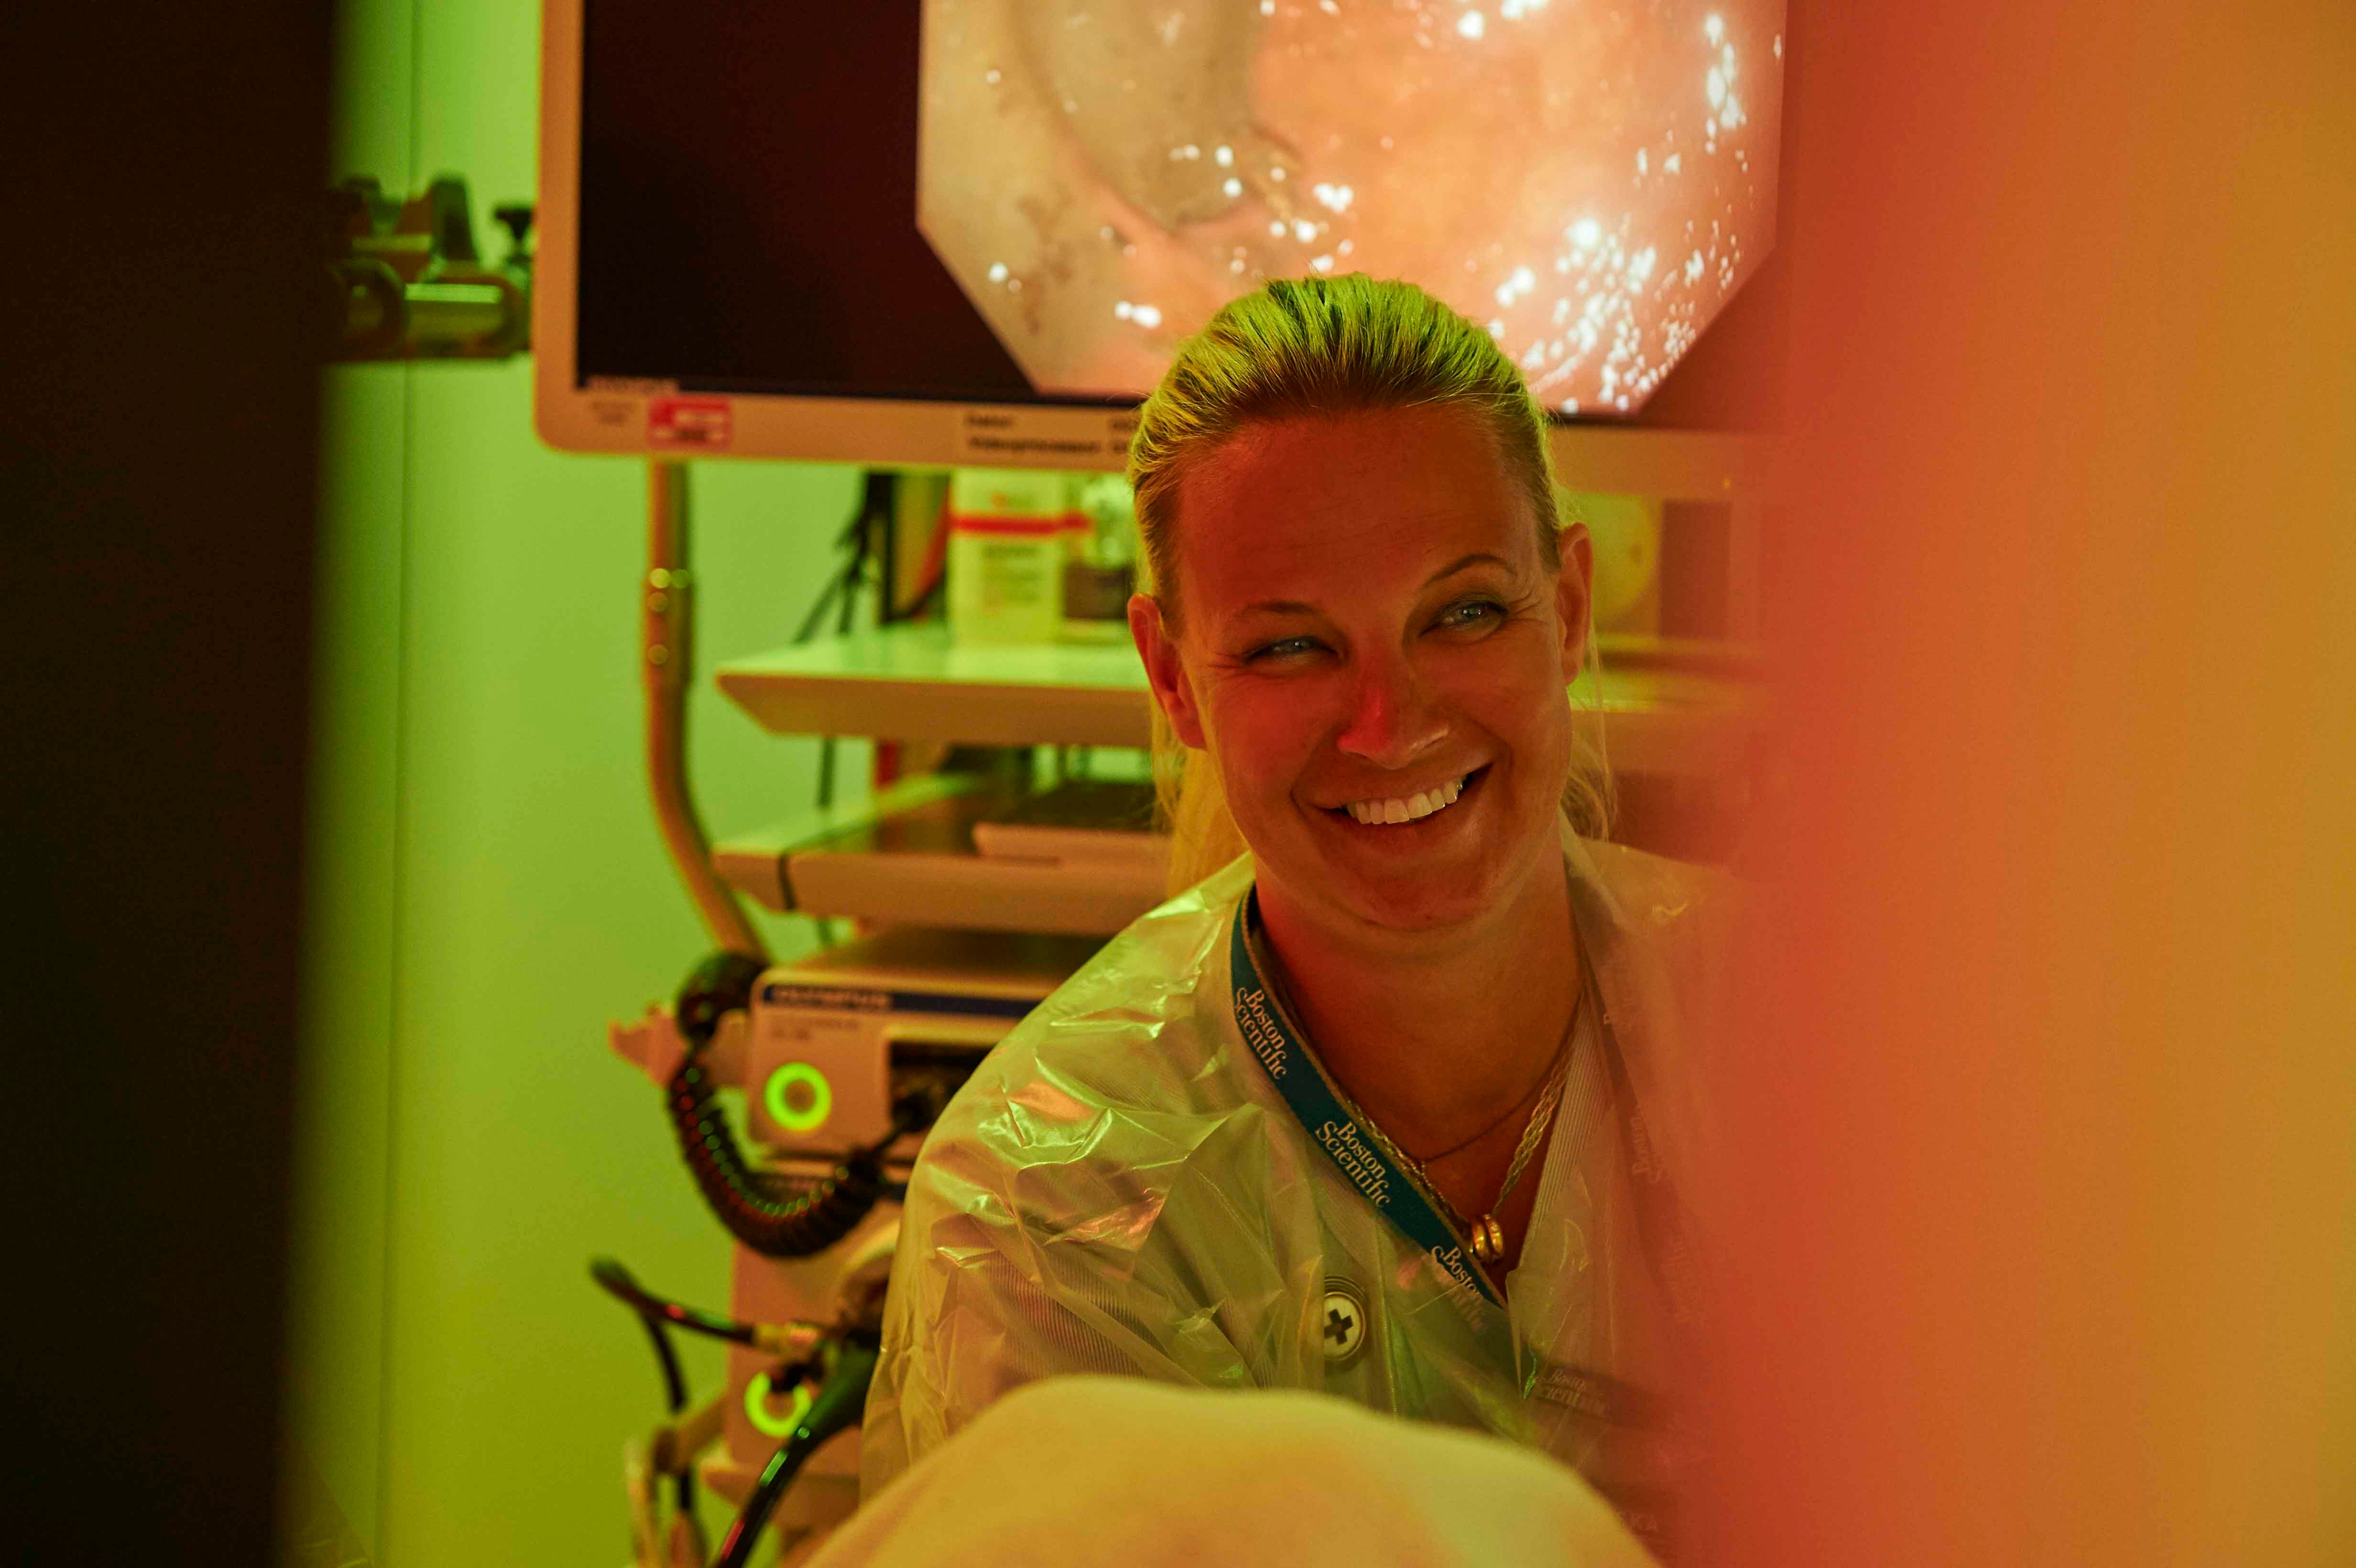 Nurse smiling while performing procedure on patient